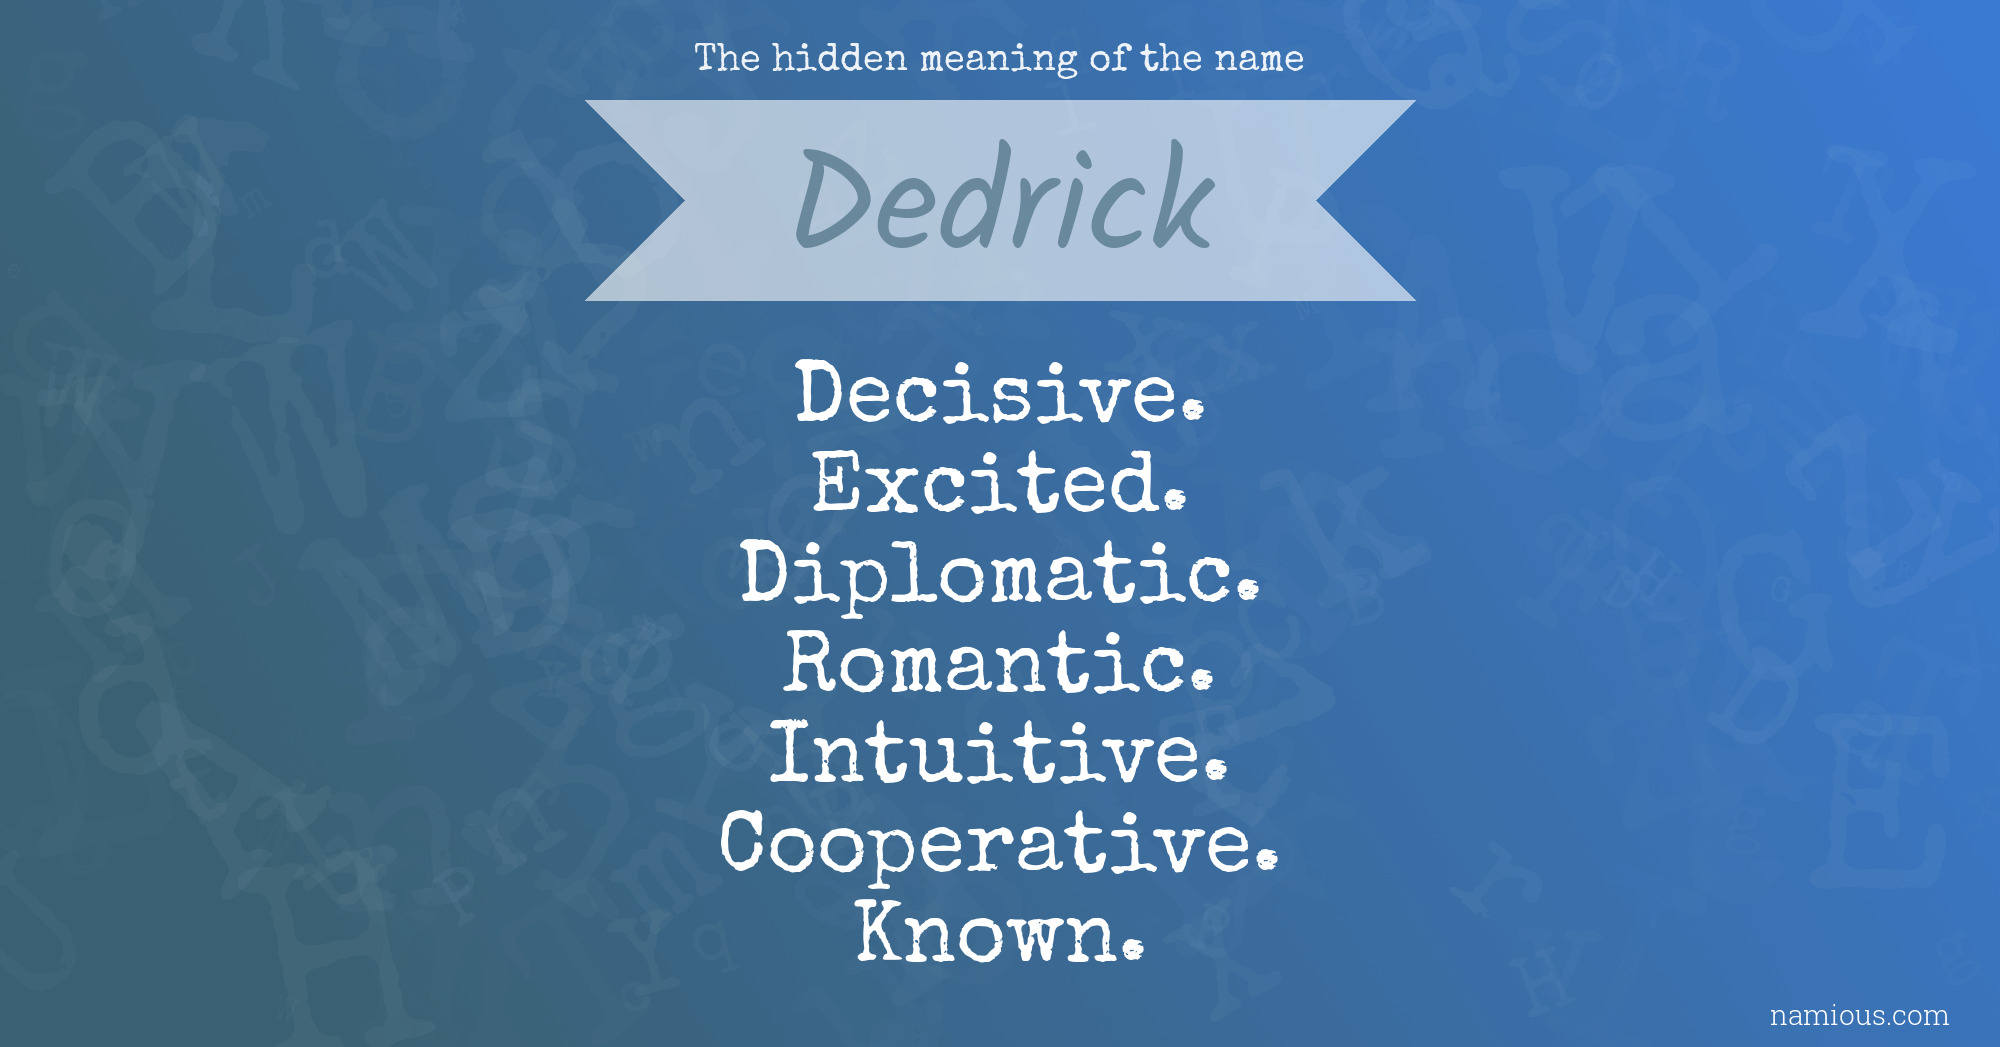 The hidden meaning of the name Dedrick